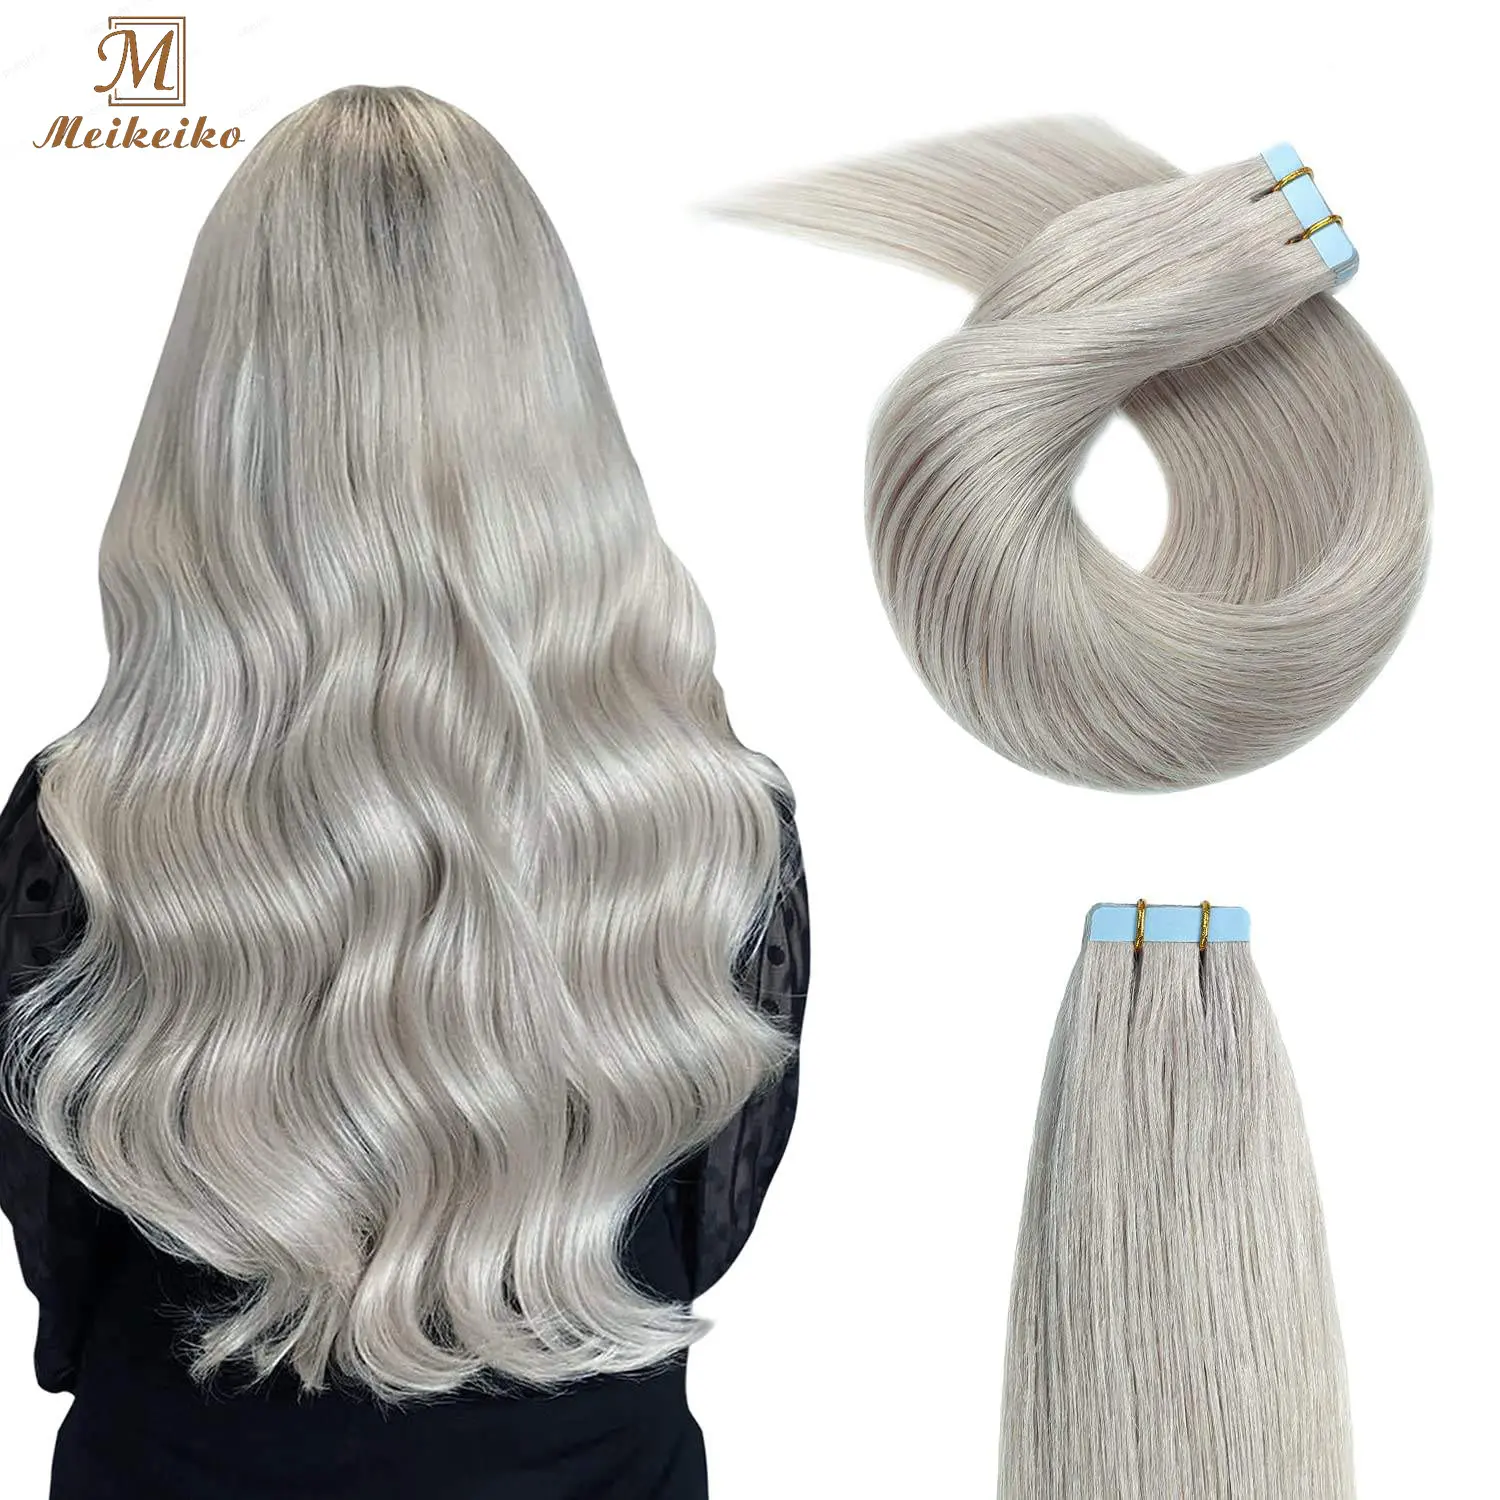 10A Brazilian Remy Human Hair Extensions Silver Color Double Drawn Tape In Hair Extensions Full Cuticle Hair